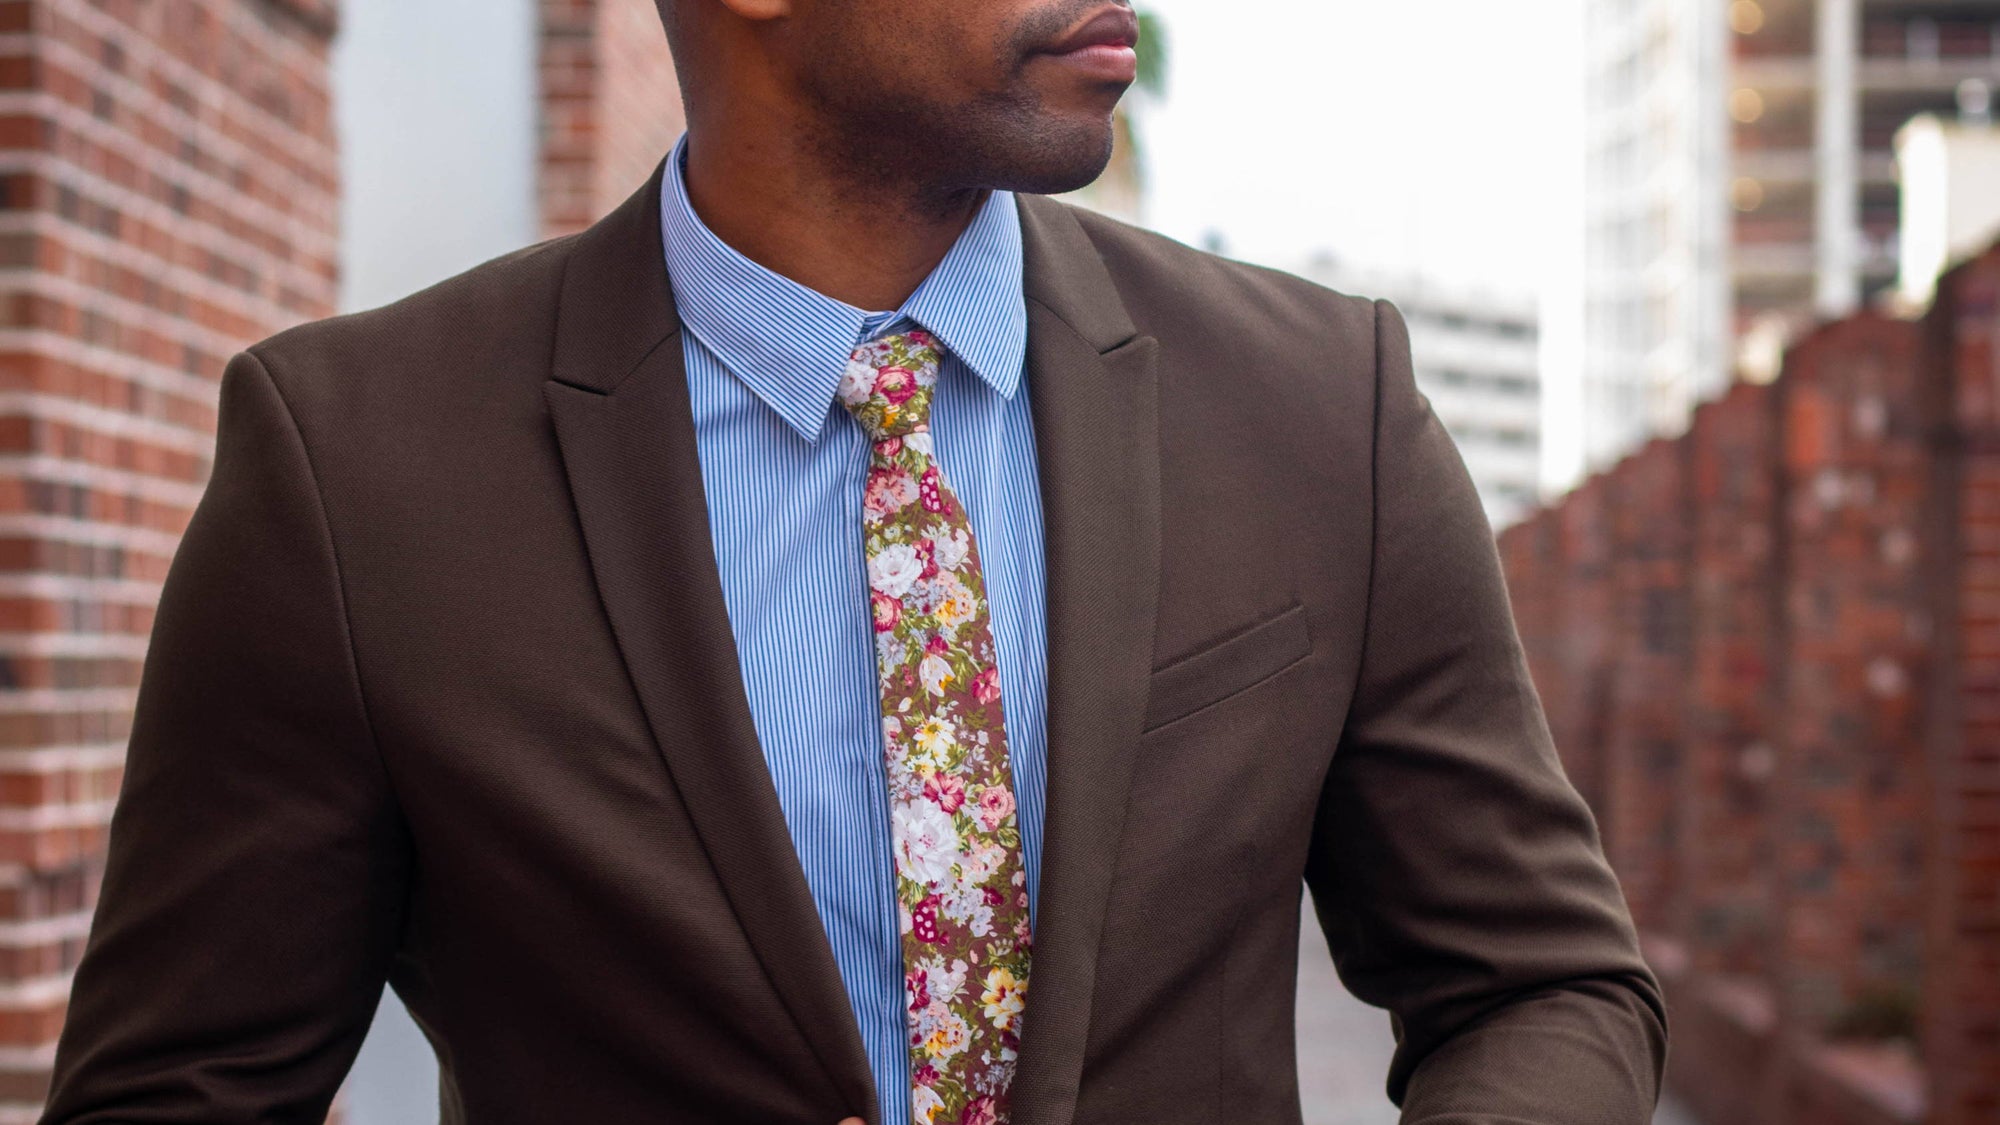 8 Floral Ties The Man in Your Life Will Love